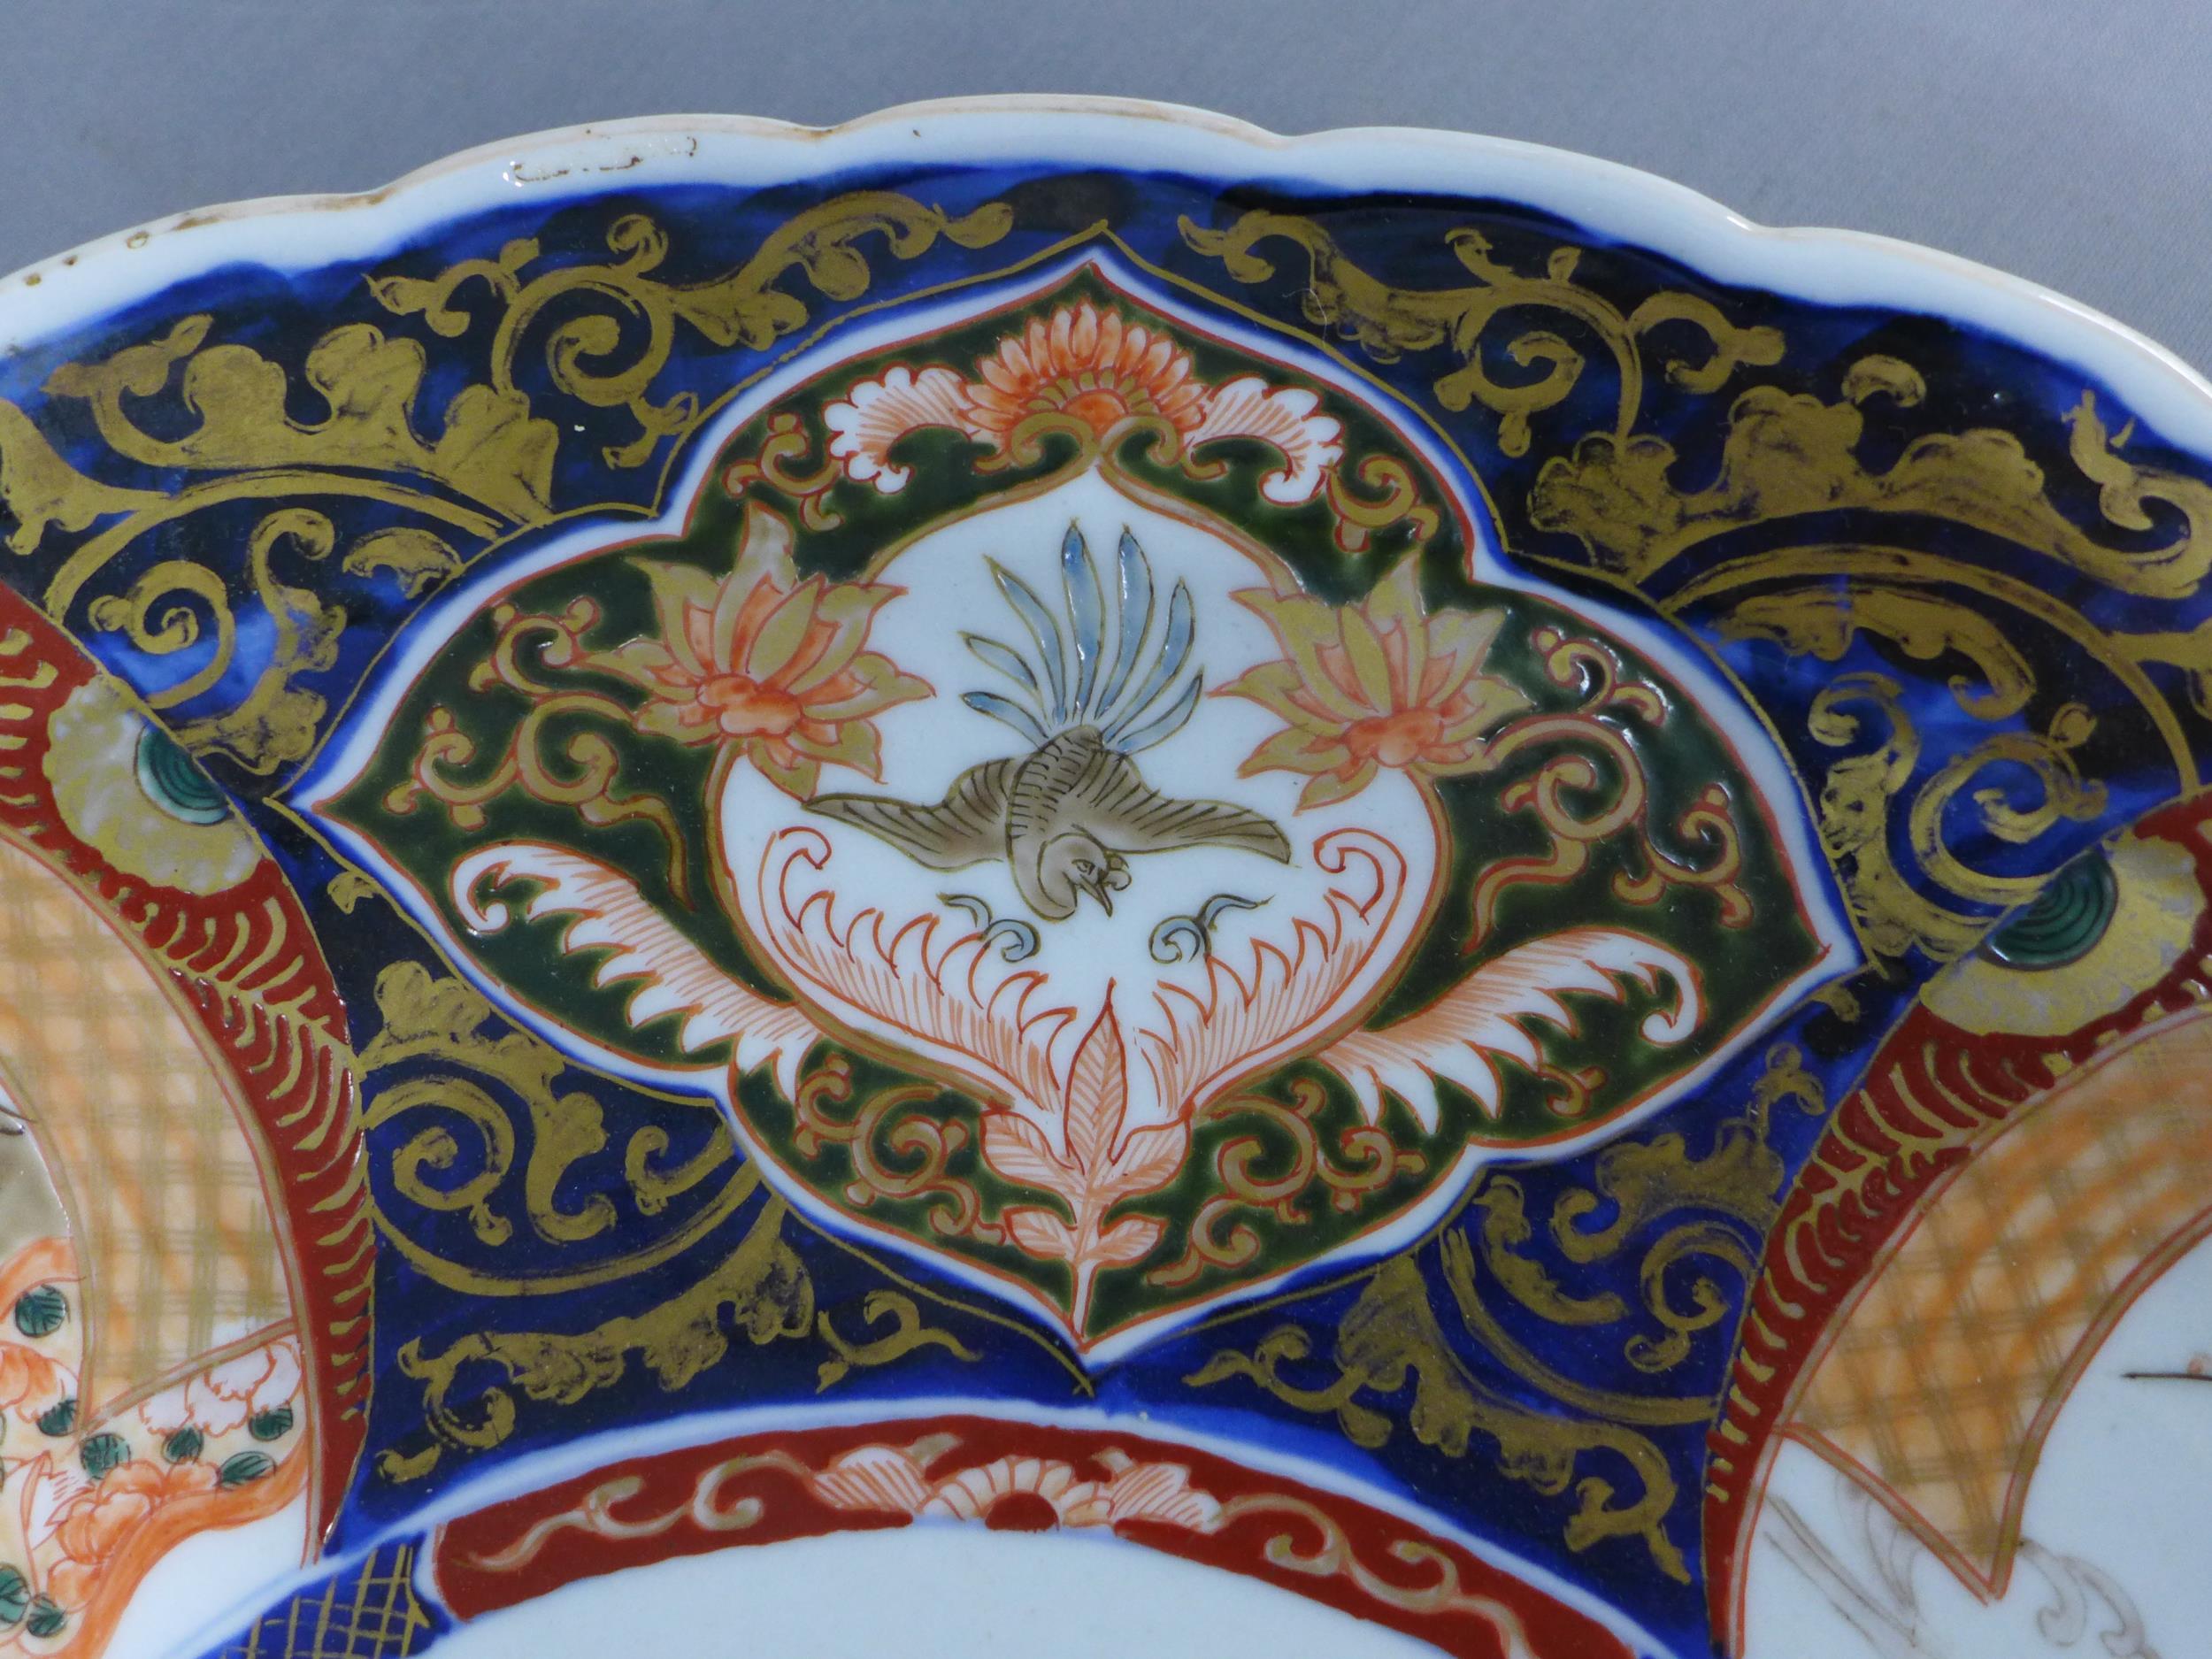 Large Imari charger, scallop edge with typical pattern of flowers and foliage, 46cm - Image 3 of 4